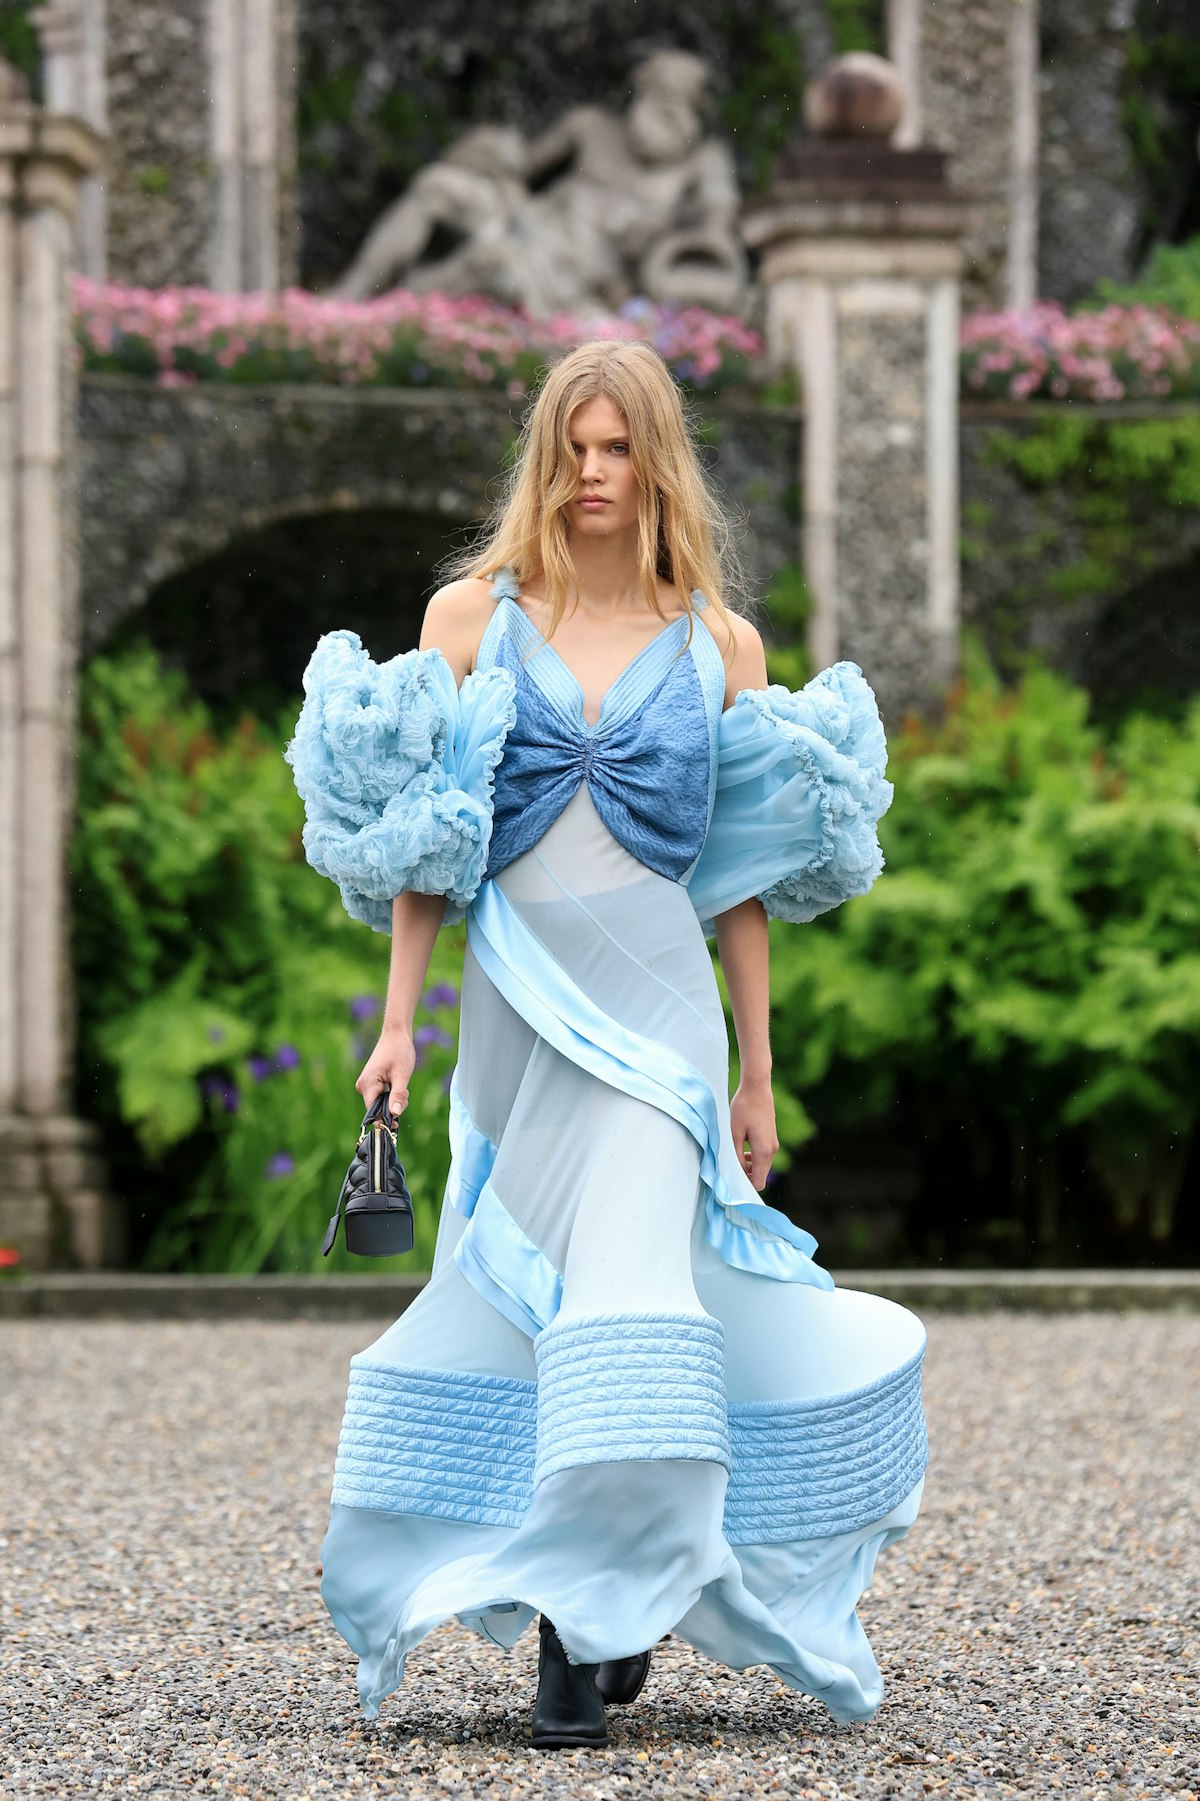 Louis Vuitton Takes on Isola Bella for Cruise 2024 Show — Every